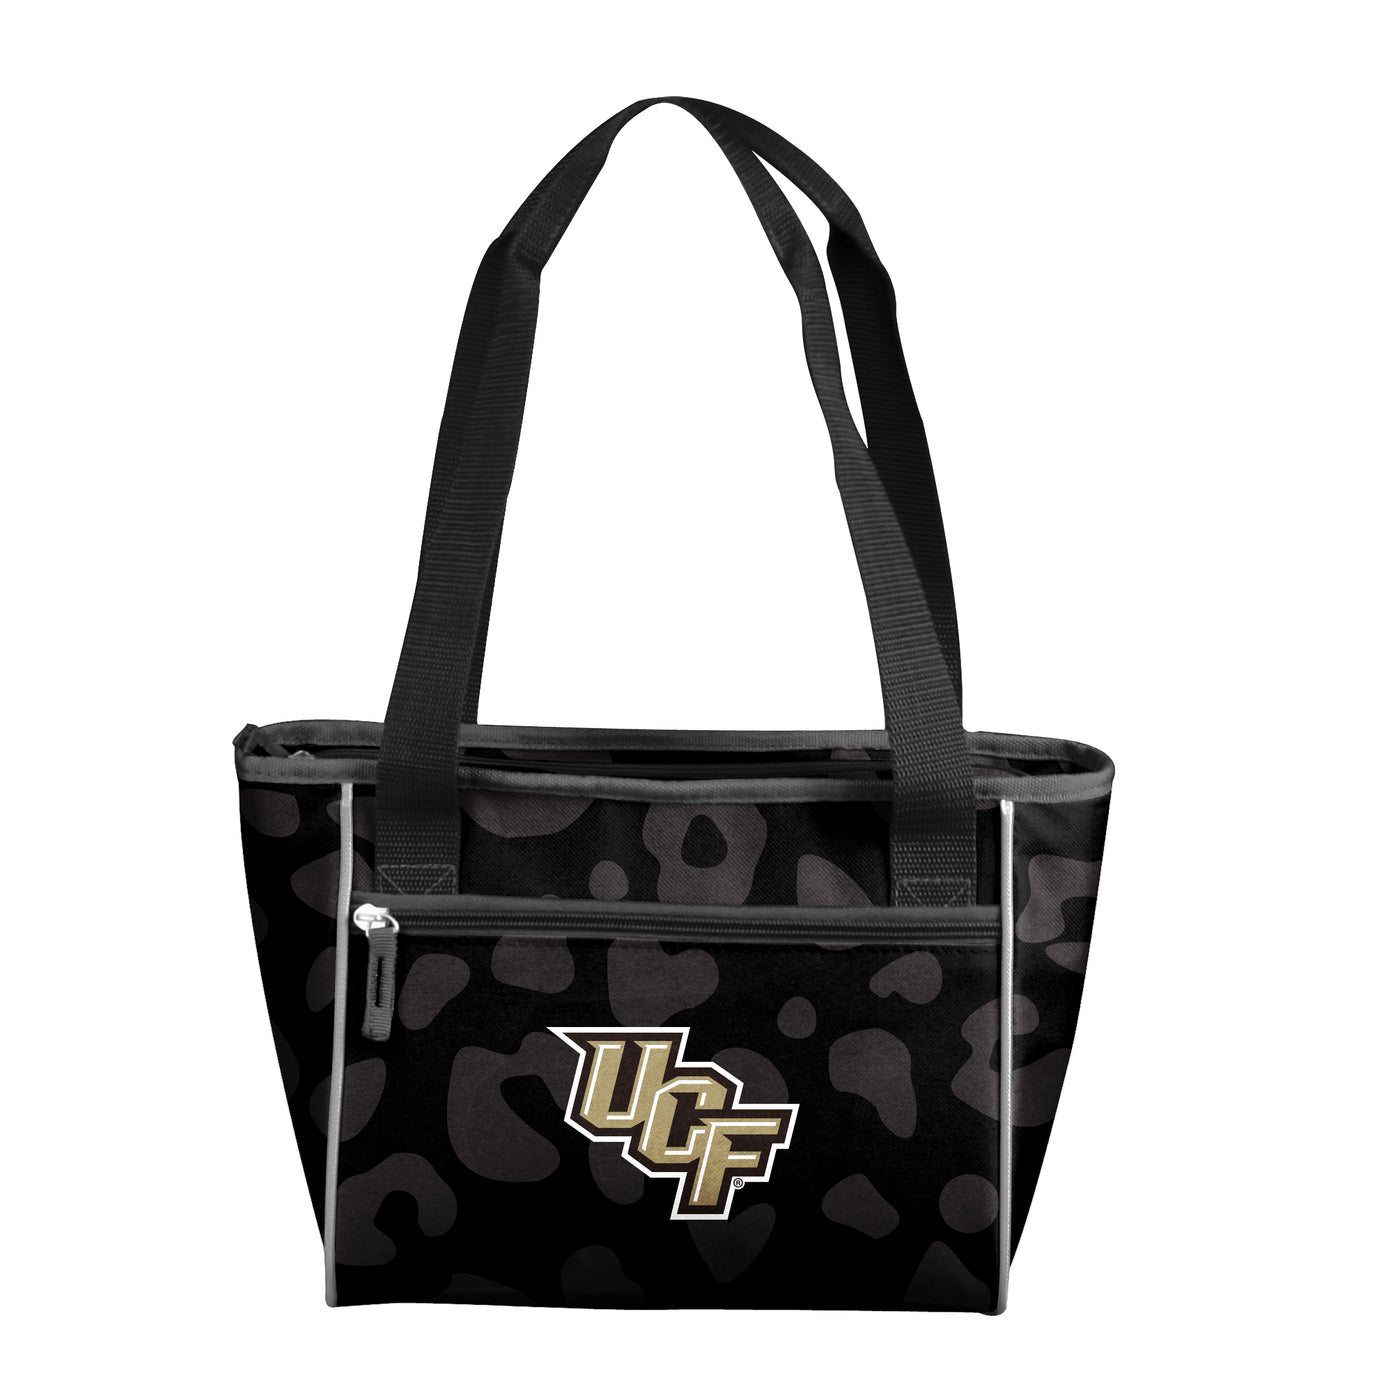 University of Central Florida Leopard Print 16 Can Cooler Tote